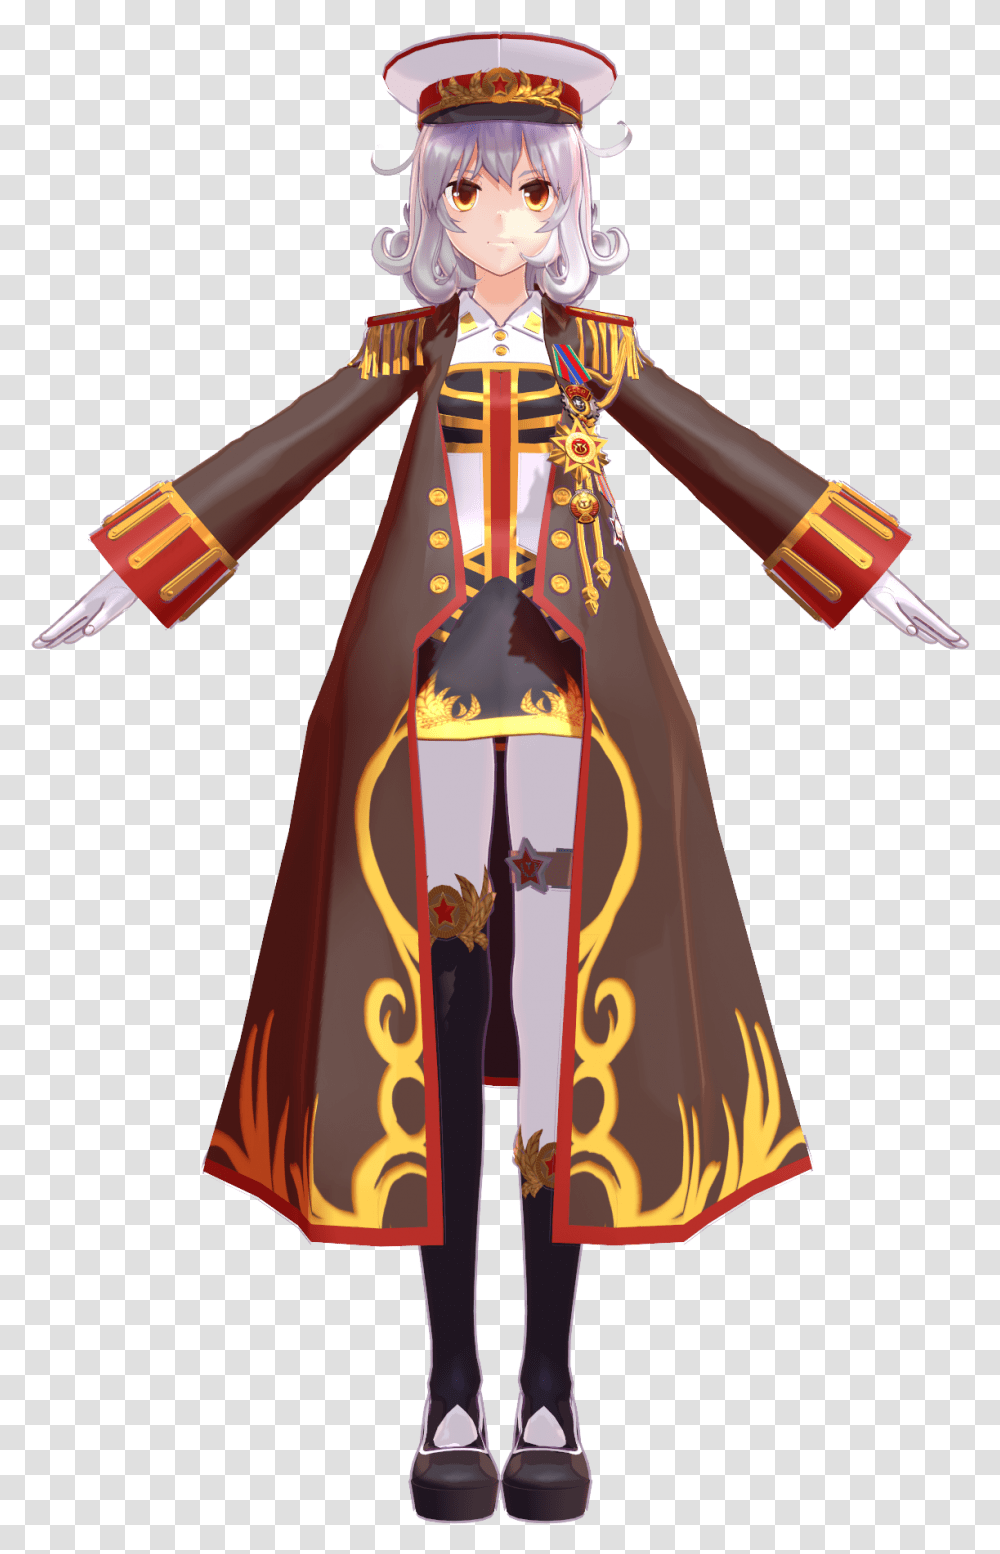 Stalin Mmd Model, Person, Costume, Fashion Transparent Png